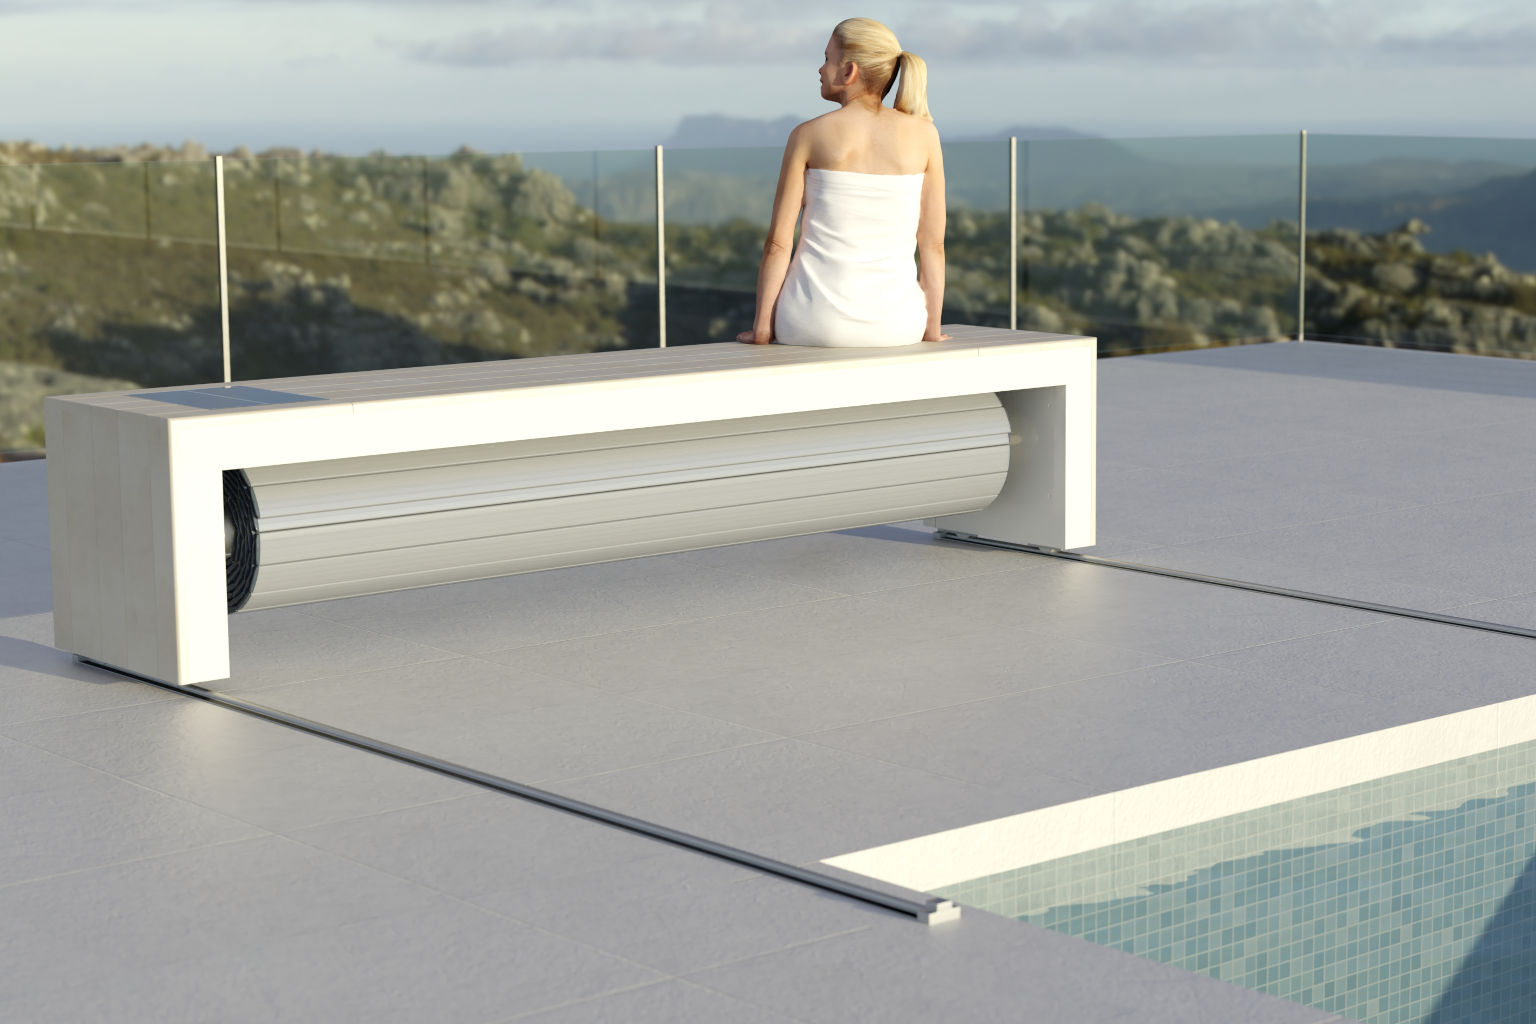 E-Star – Redefining Automatic Pool Covers